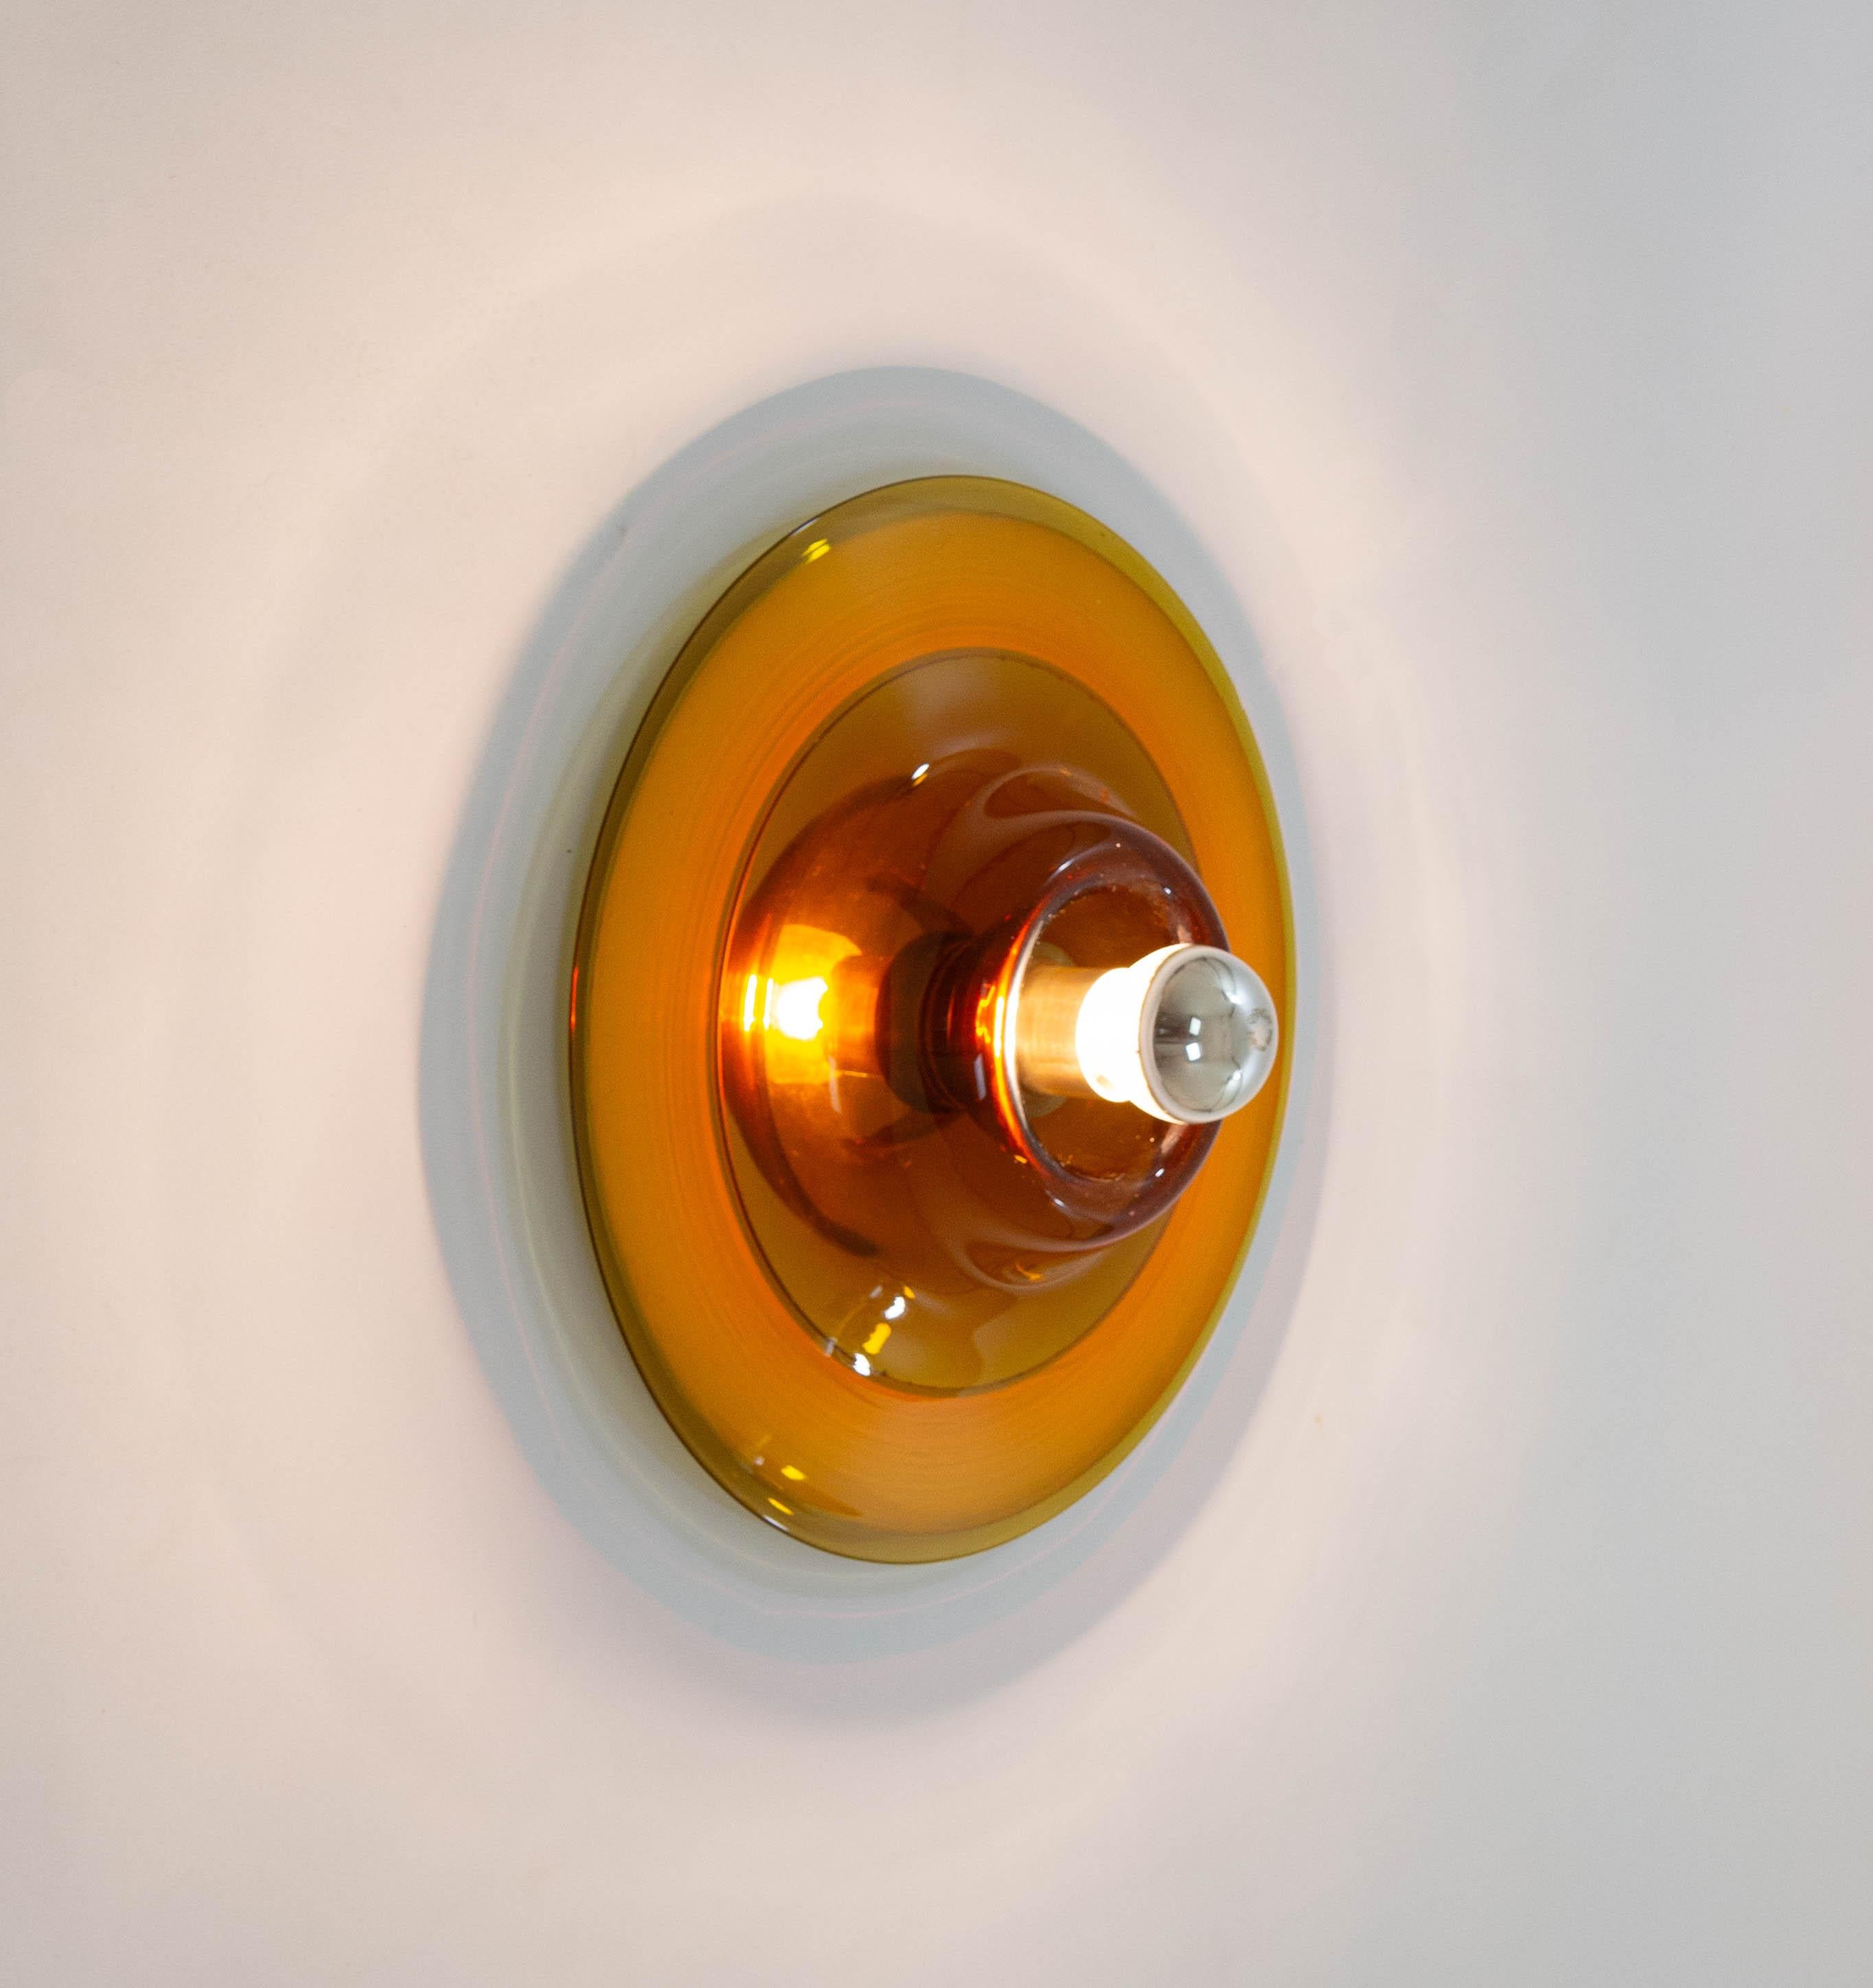 No. 820 amber wall-bracket or ceiling fixture manufactured by Venetian glass specialist Venini for Pierre Cardin, 1970s.

The outer layer of the lamp is made of Murano glass which is blown and opened by hand. A small round mirror is attached to the